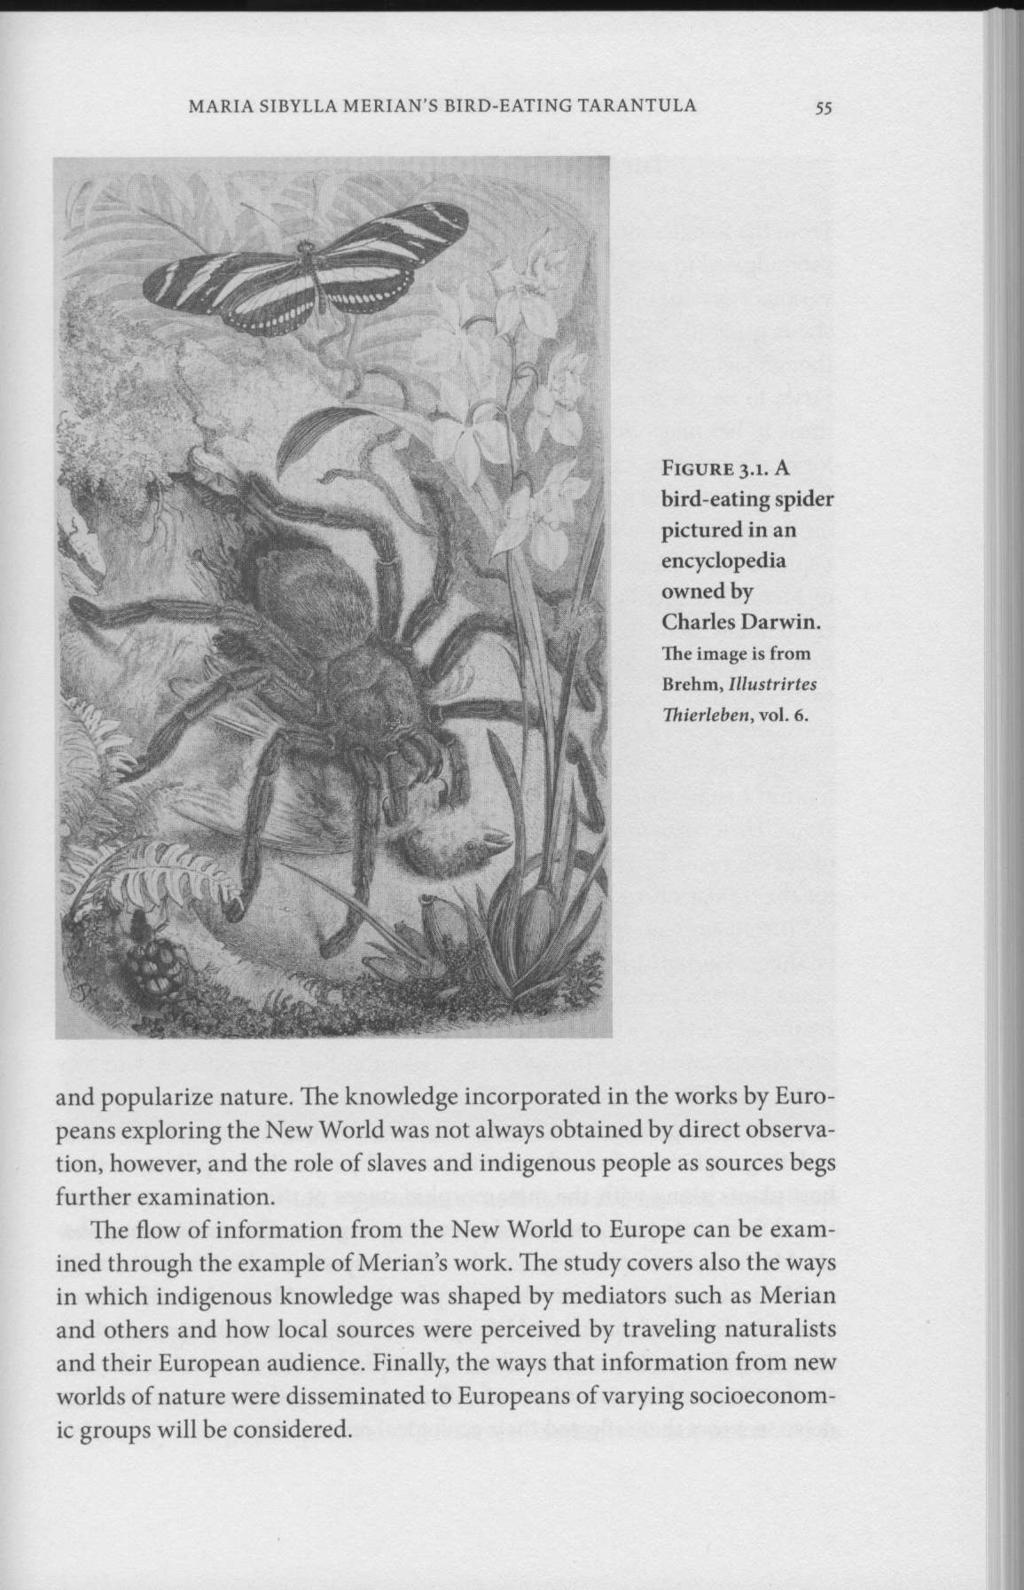 MARIA SIBYLLA MERIAN'S BIRD-EATING TARANTULA 55 FIGURE 3.1. A bird-eating spider pictured in an encyclopedia owned by Charles Darwin. The image is from Brehm, Illustrirtes Thierleben, vol. 6.